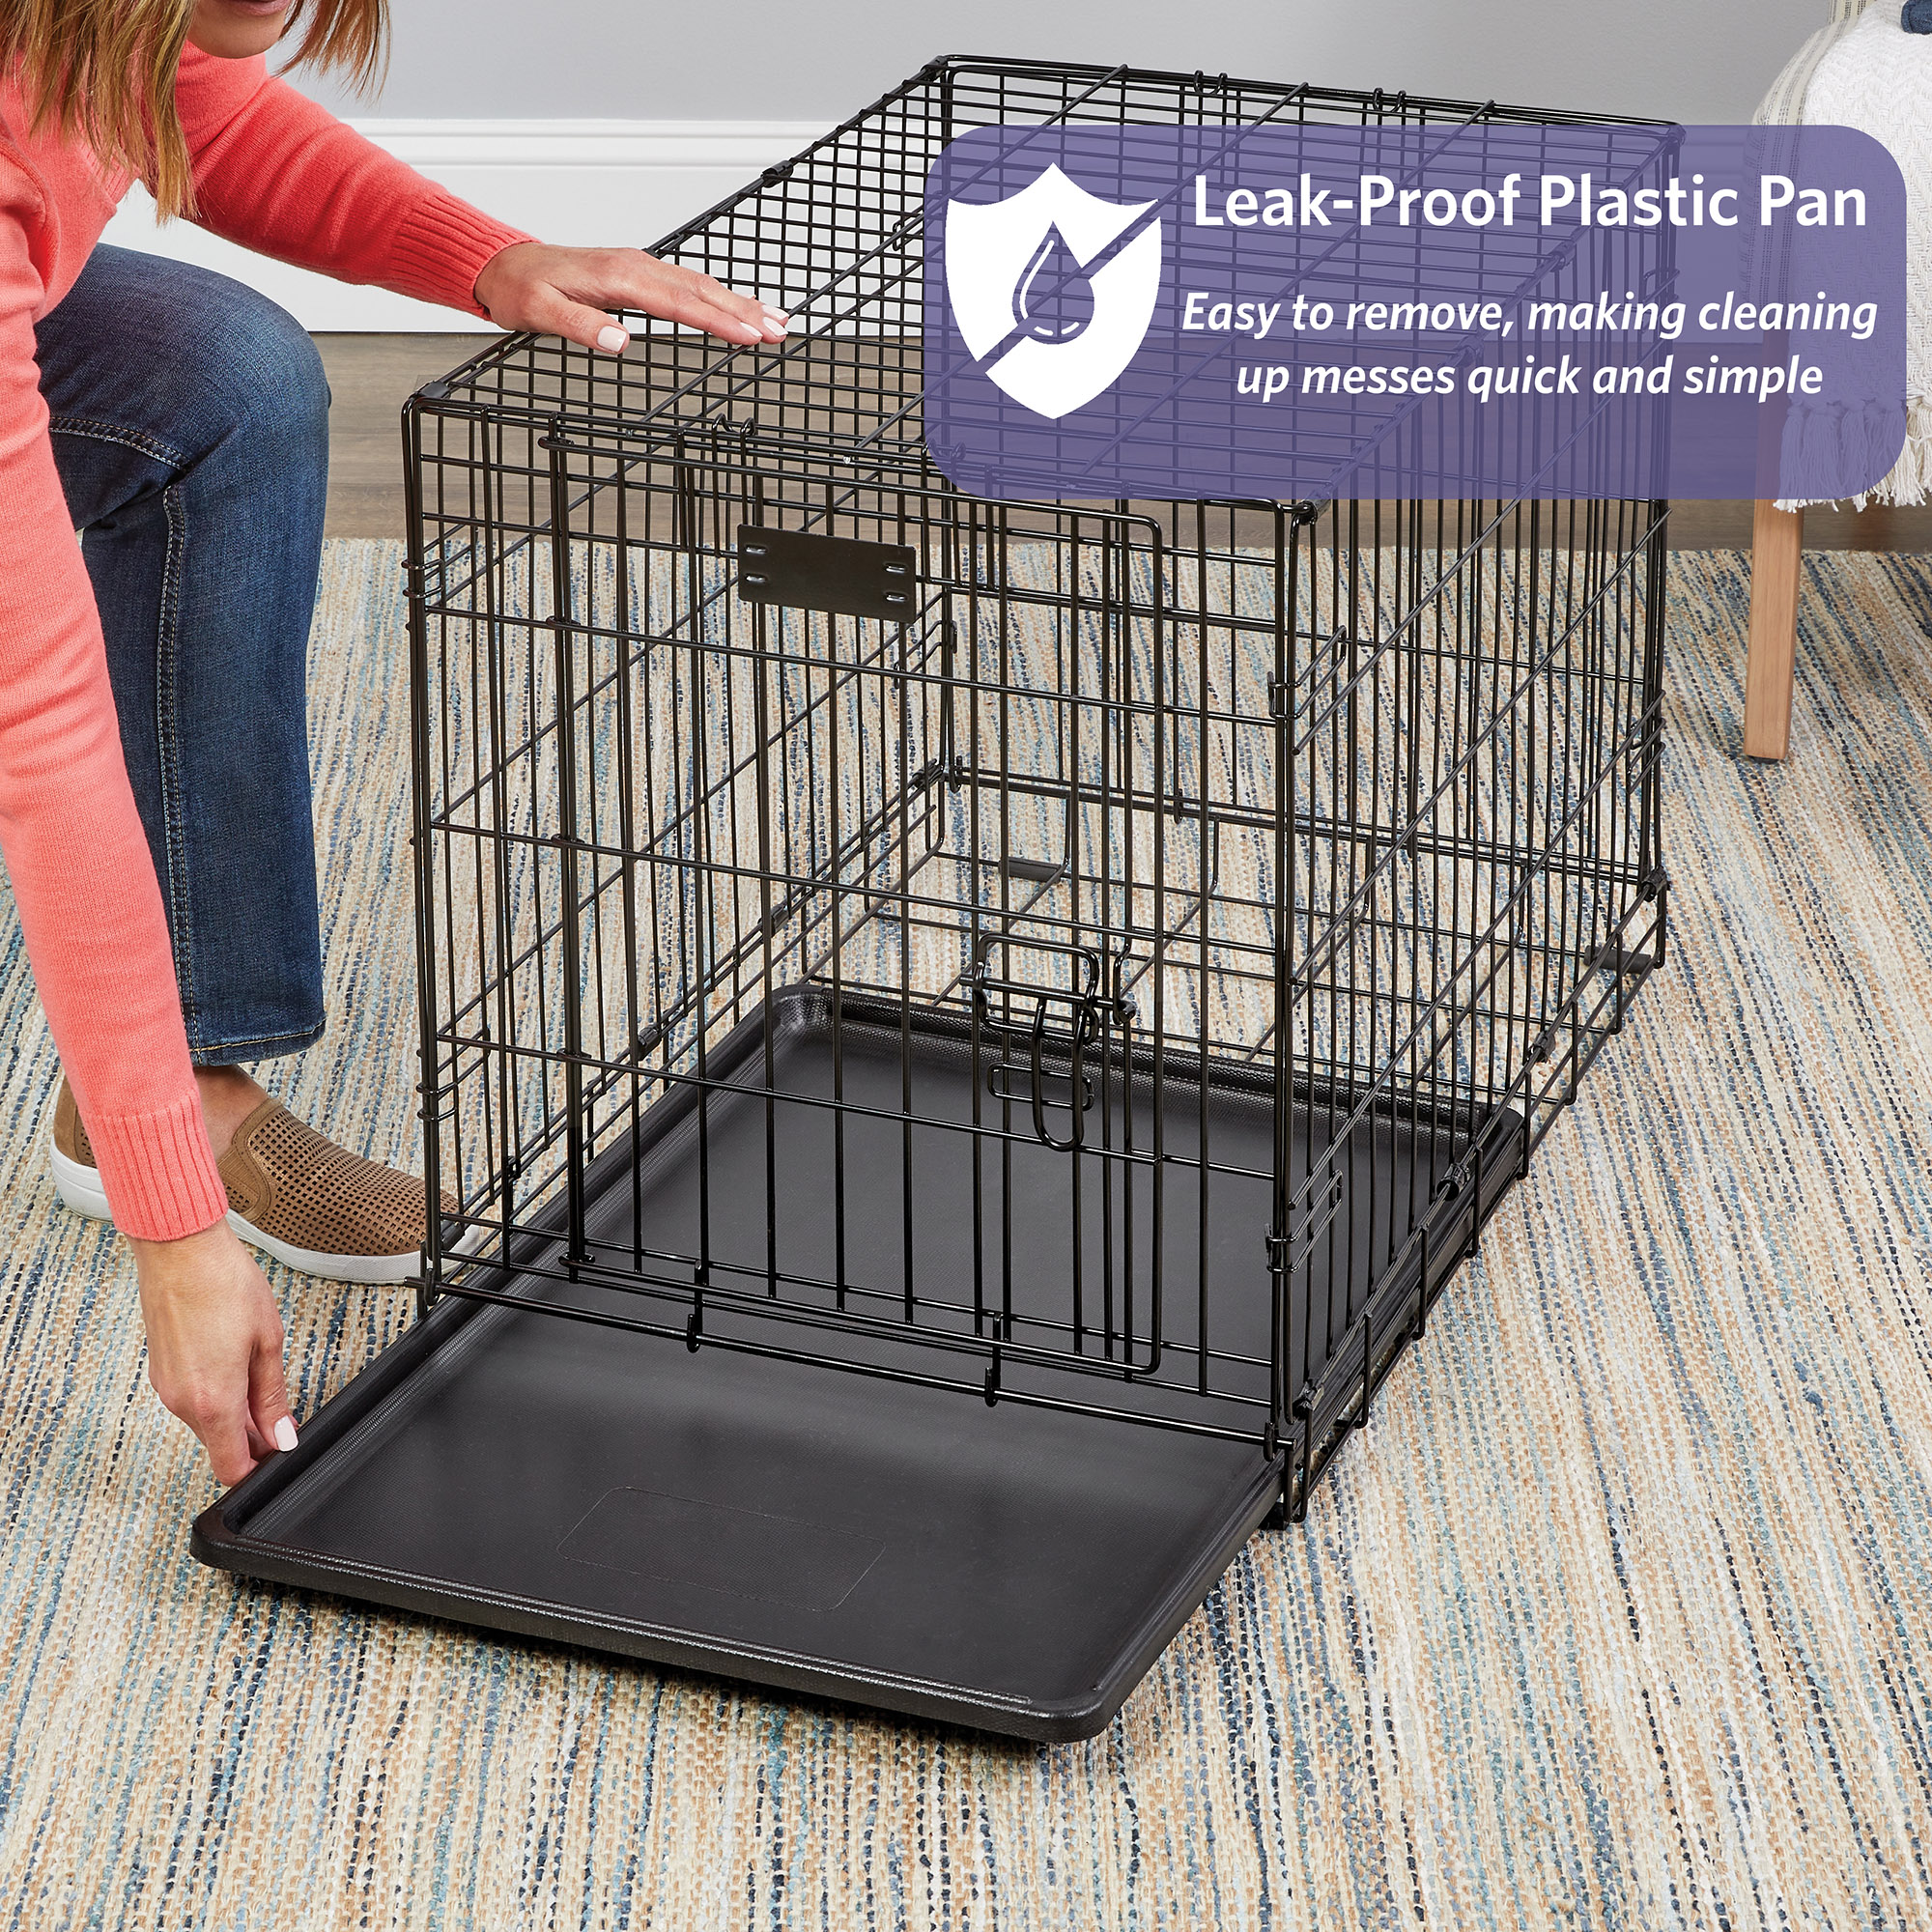 MidWest Homes for Pets Newly Enhanced Single Door iCrate Dog Crate 42 inch - image 5 of 8